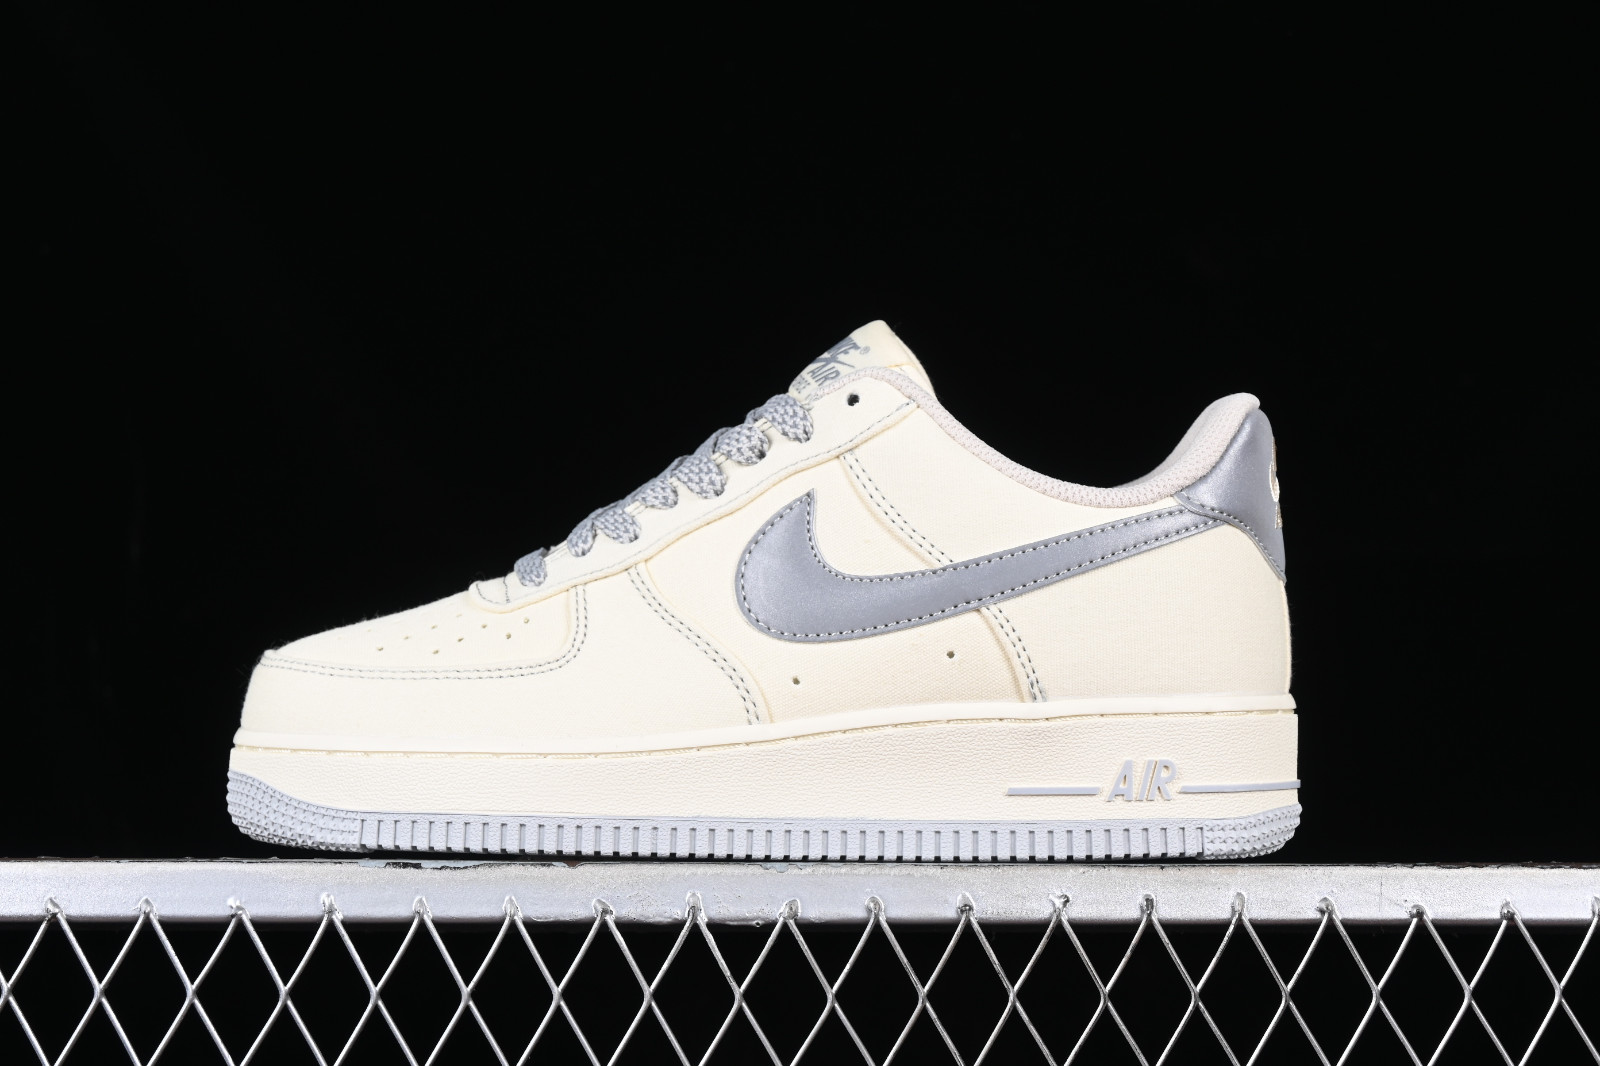 Nike Air Force 1 '07 Low Triple White for Sale, Authenticity Guaranteed